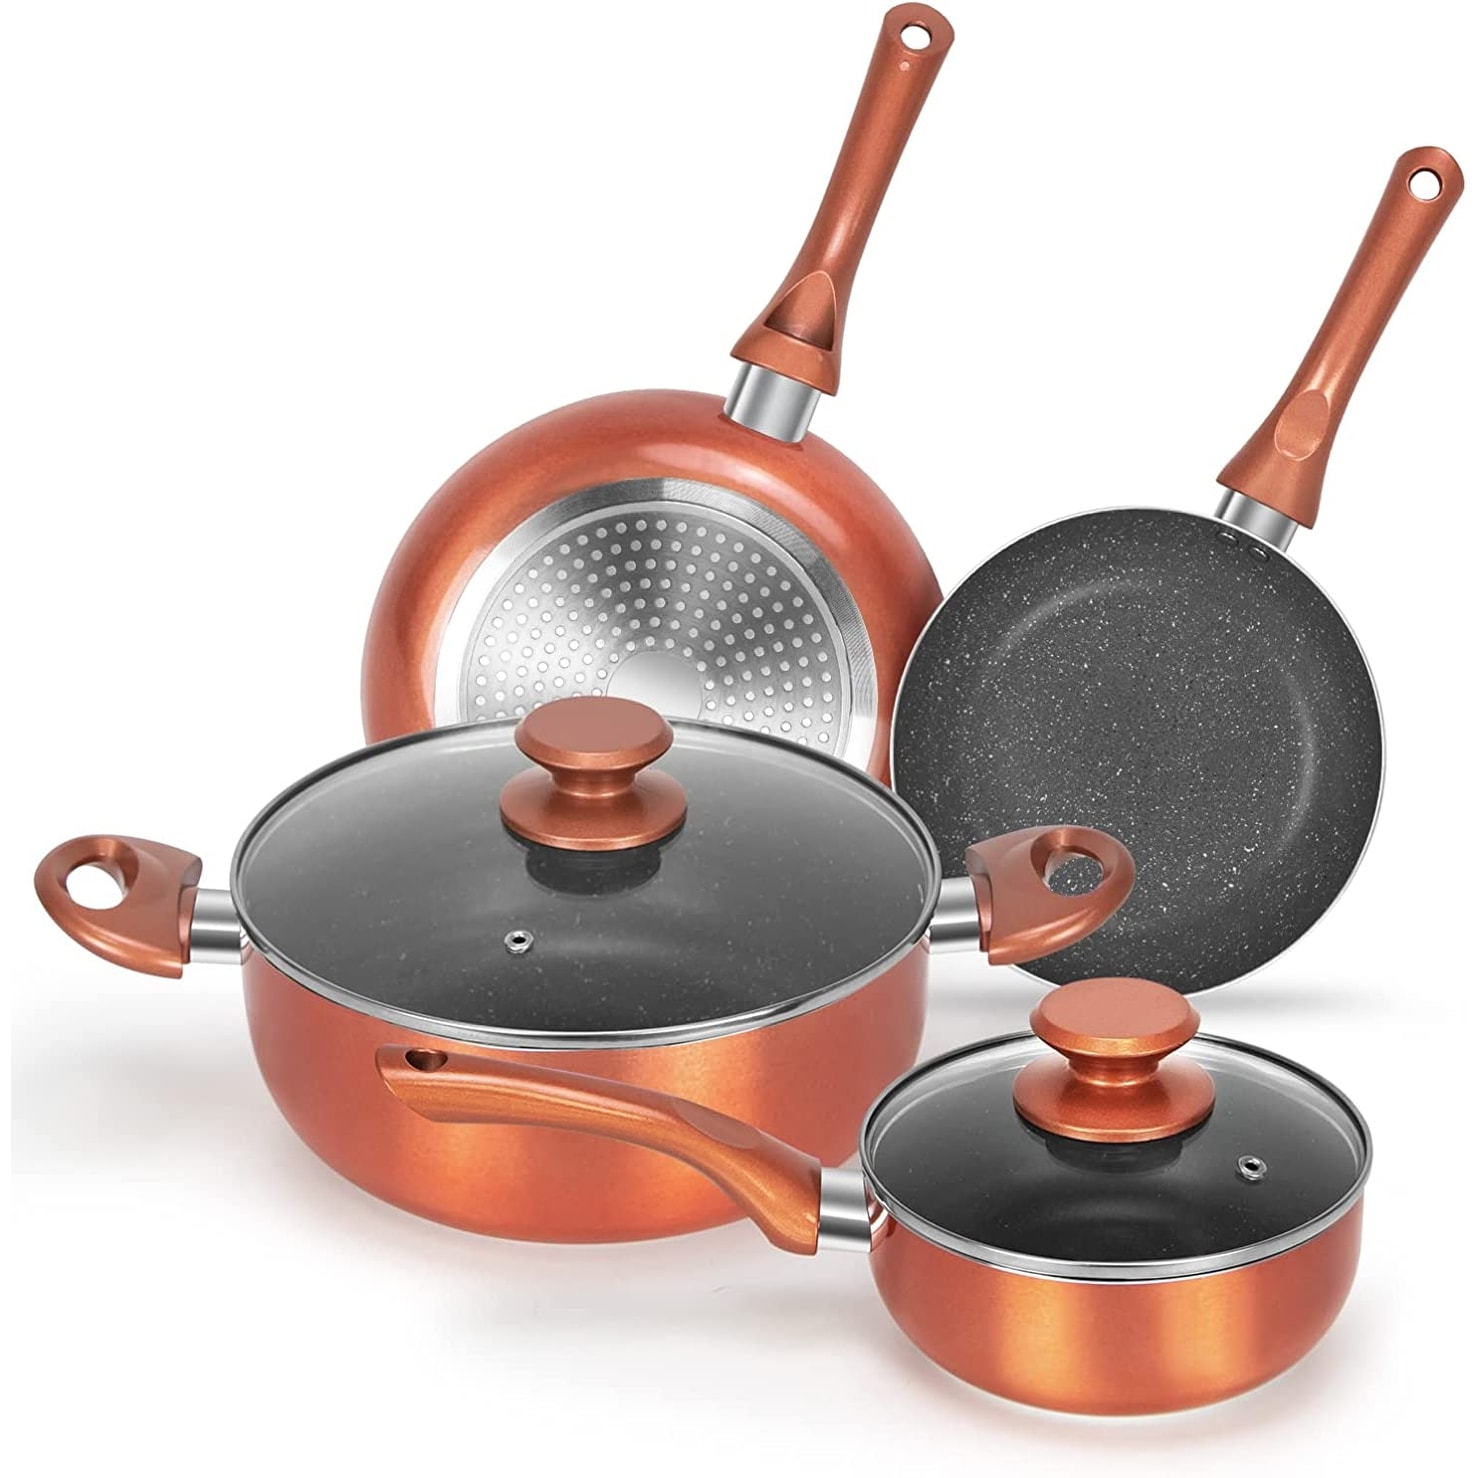 Farberware Easy Clean Steam Vent Cookware Nonstick Pots and Pans Set, 14-Piece, Copper